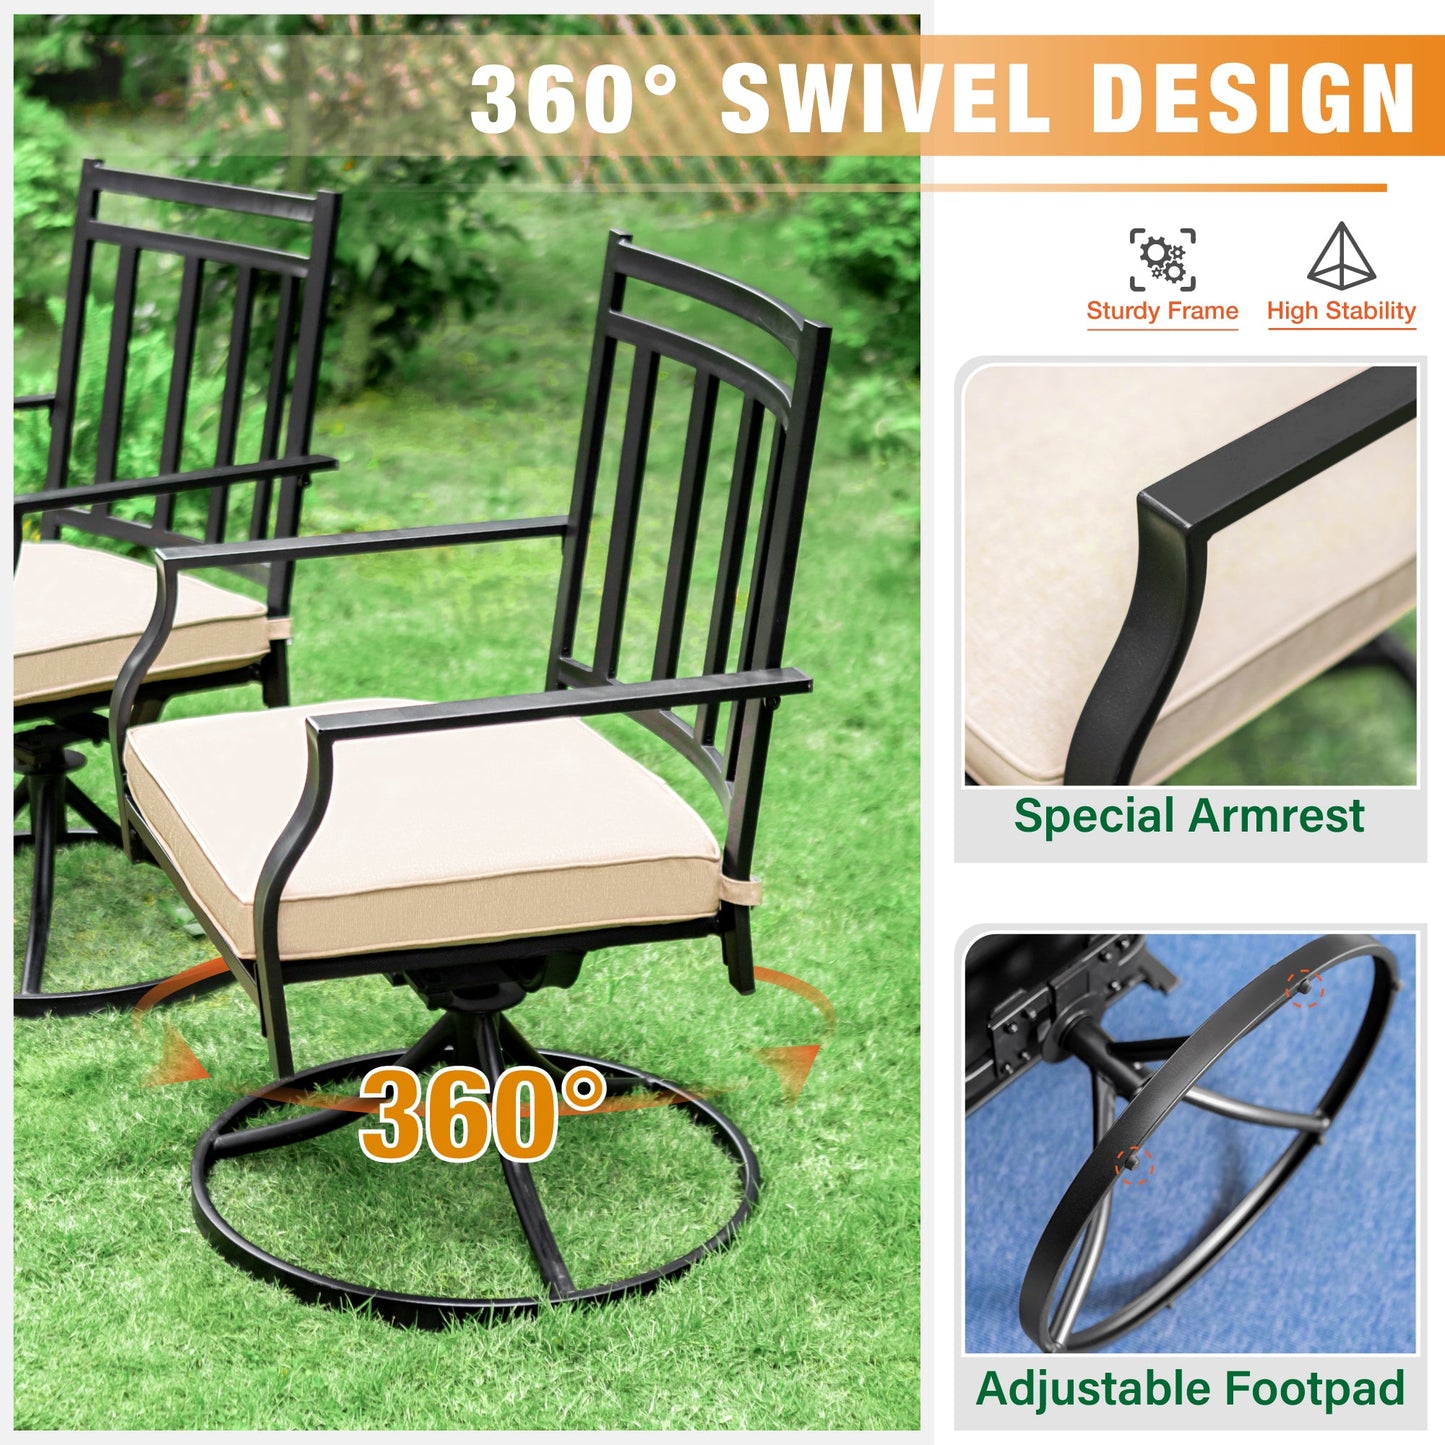 Sophia & William 5 Piece Outdoor Patio Metal Dining Set Cushioned Swivel Chairs and 37 Square Table Set